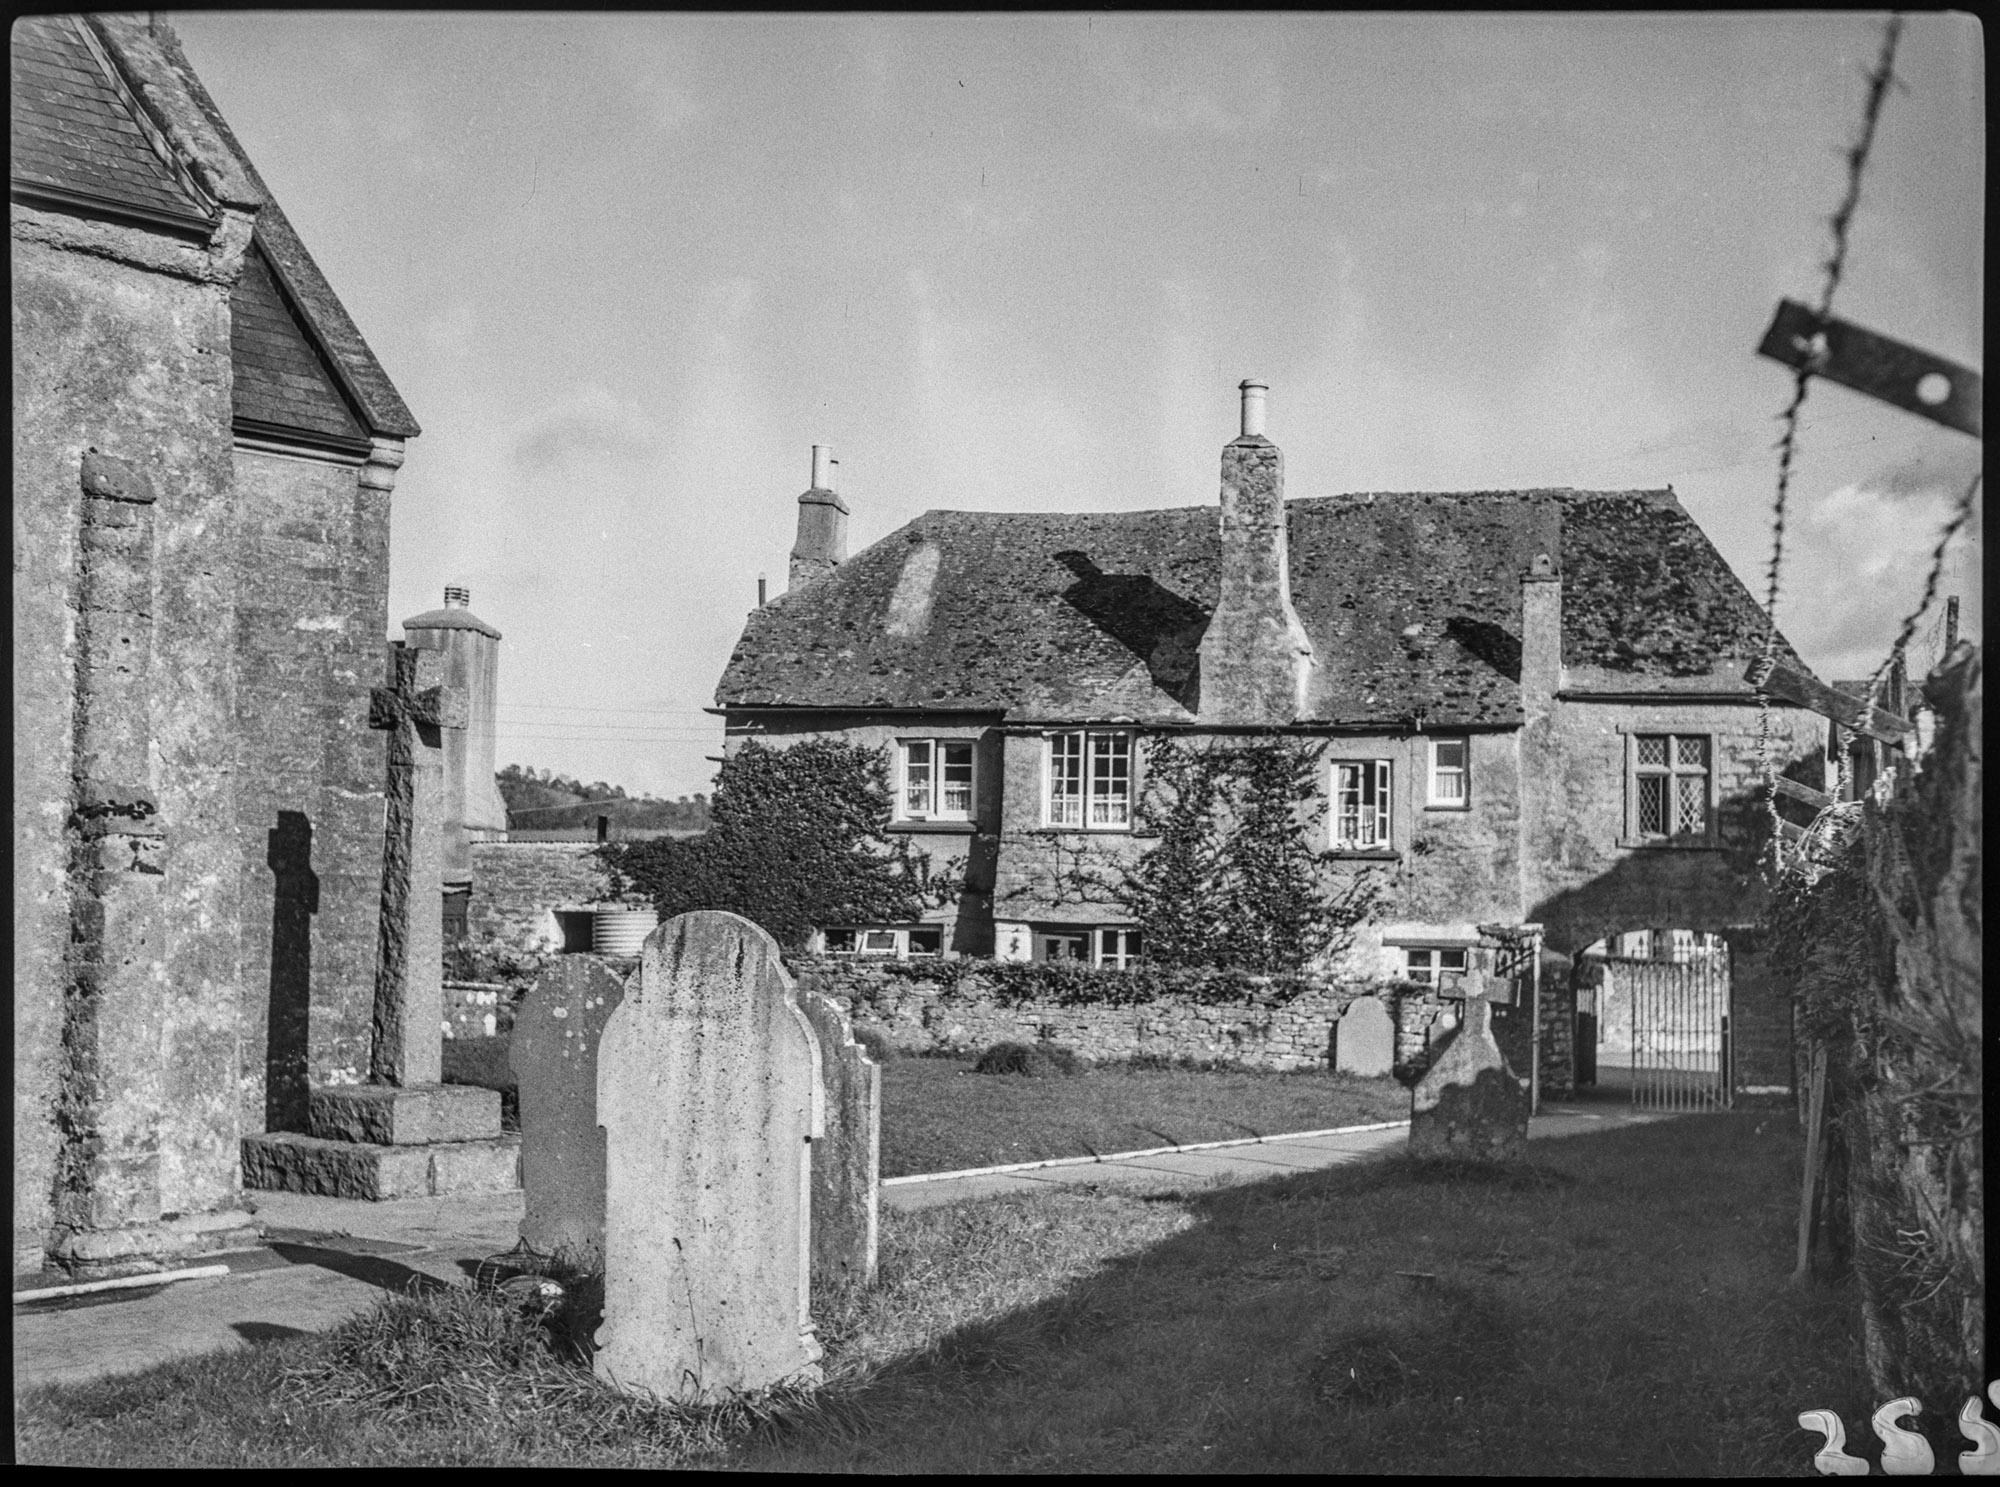 Black and white photograph showing part of a church and churchyard in the foreground and a two-storey stone building in the background. To the right of the image is a stone wall topped with barbed wire.